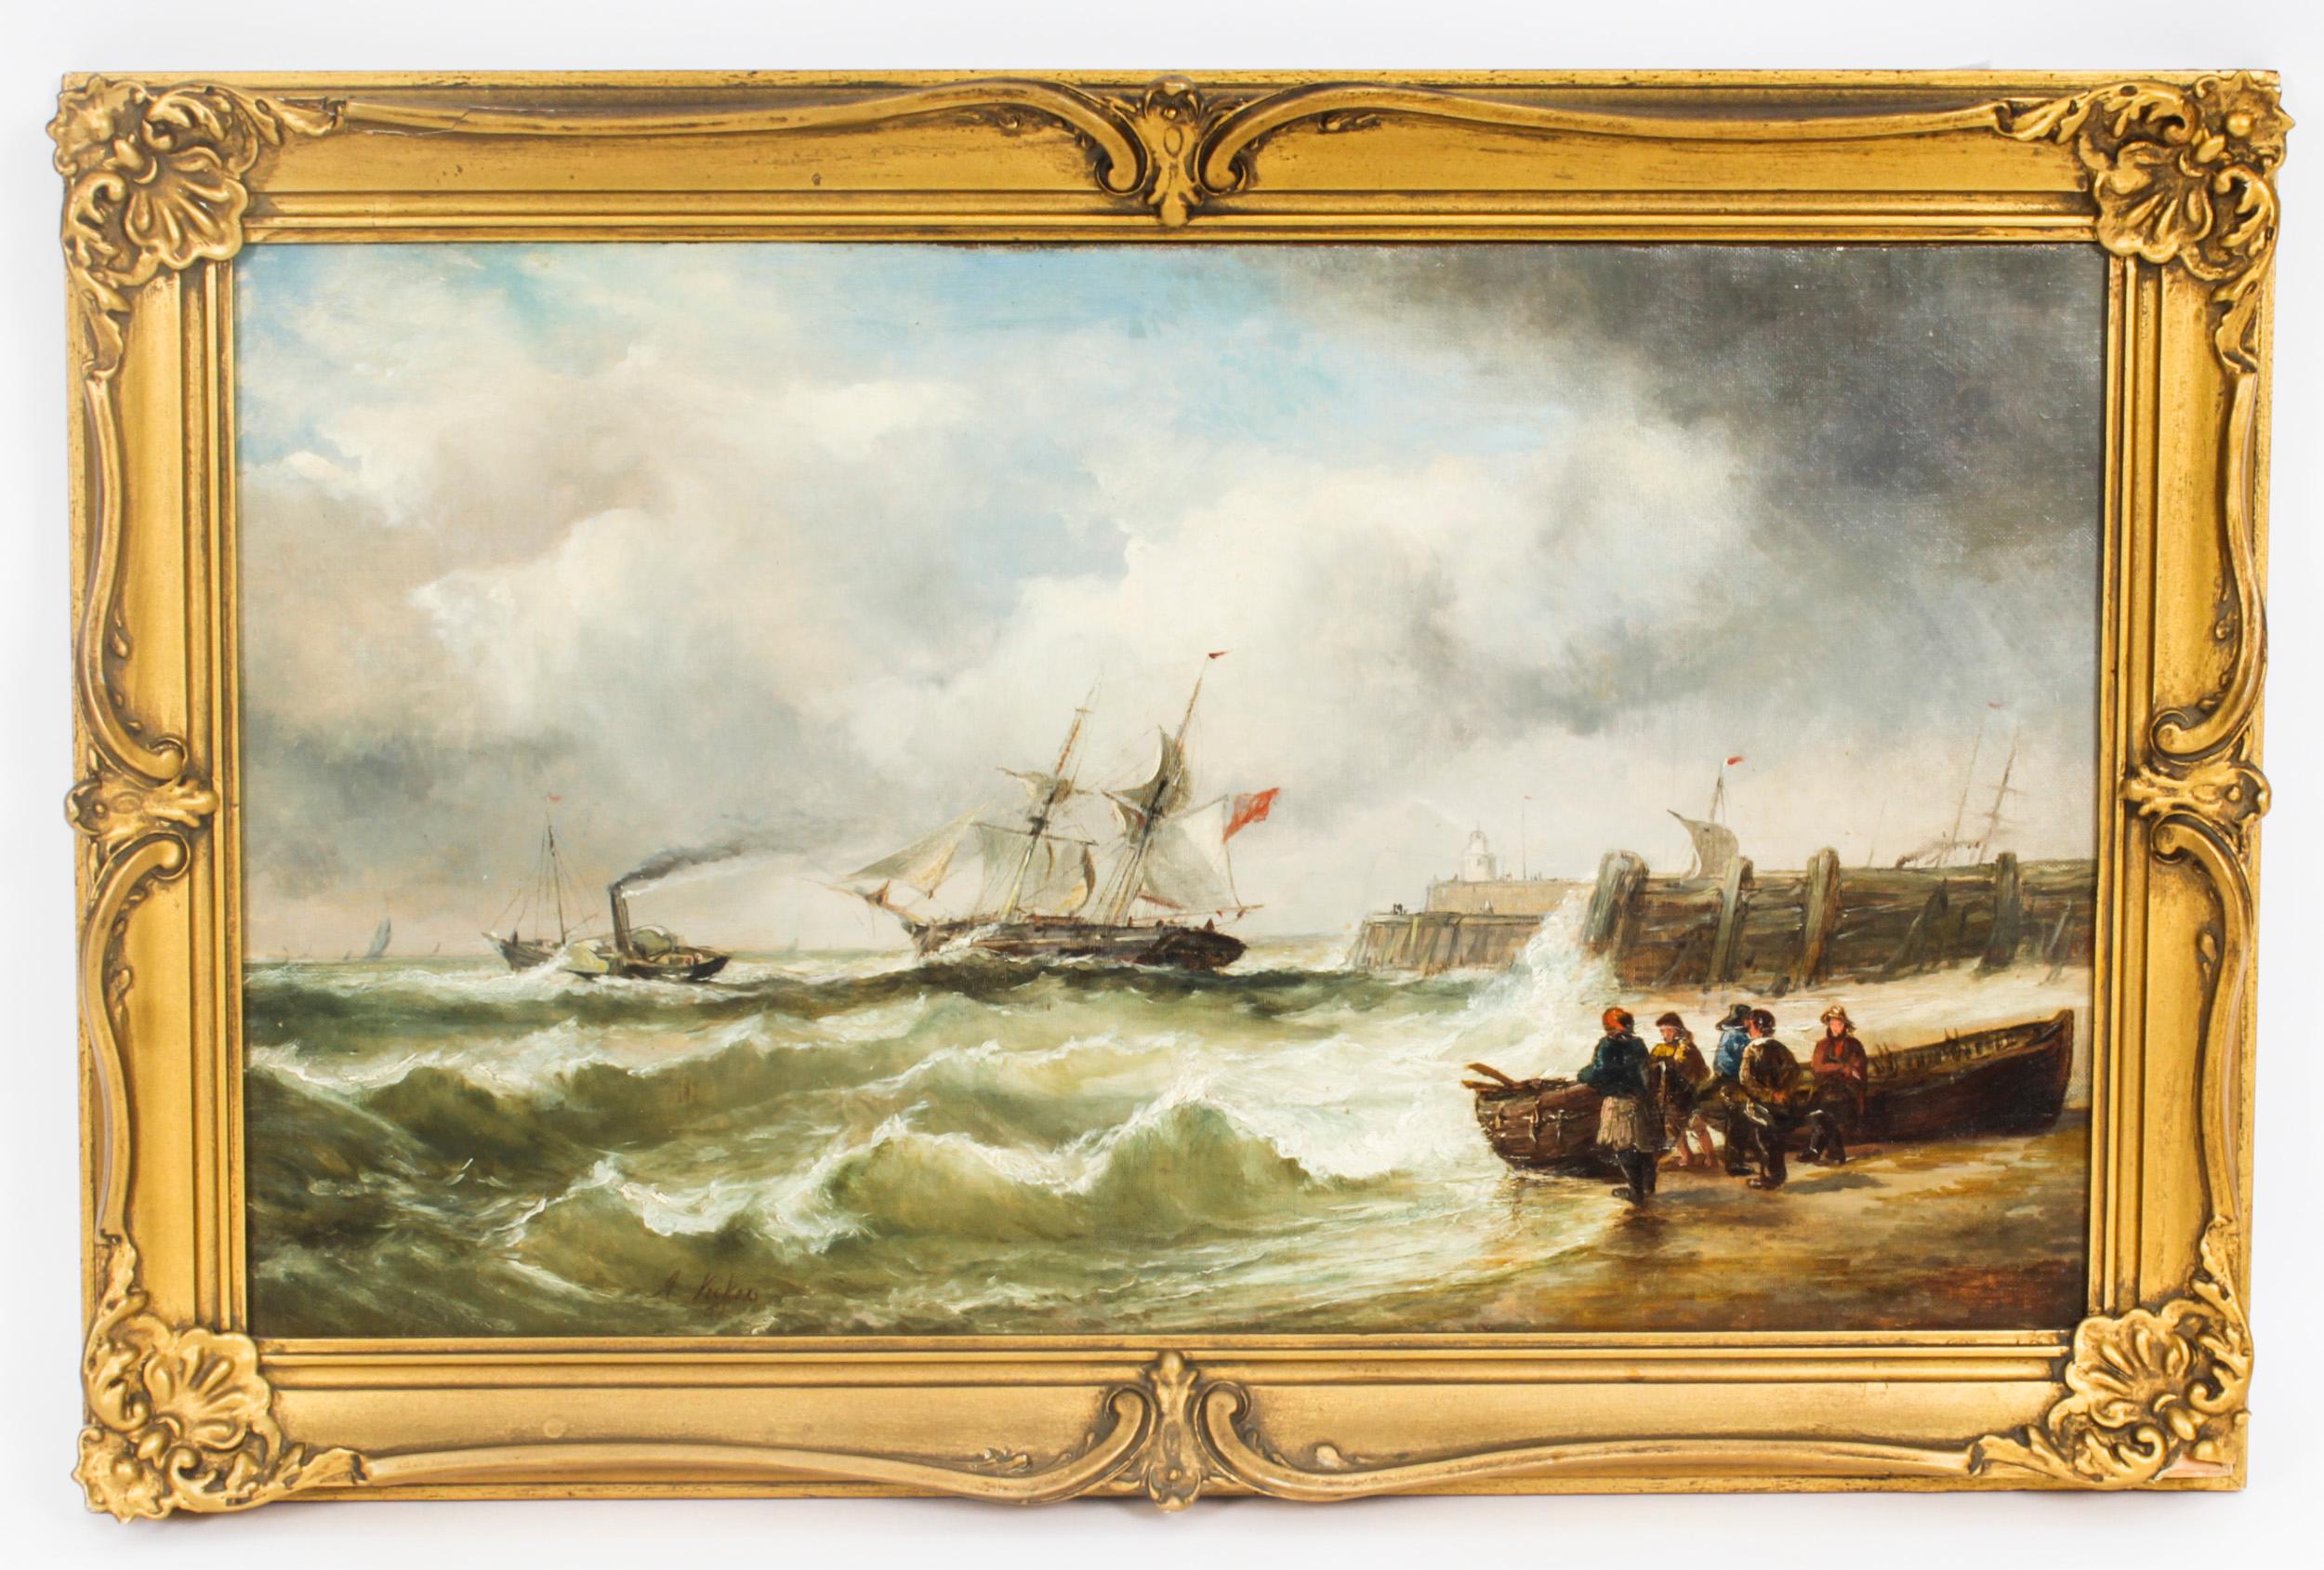 Antique Oil on Canvas Seascape Painting Alfred Vickers 19th Century 7